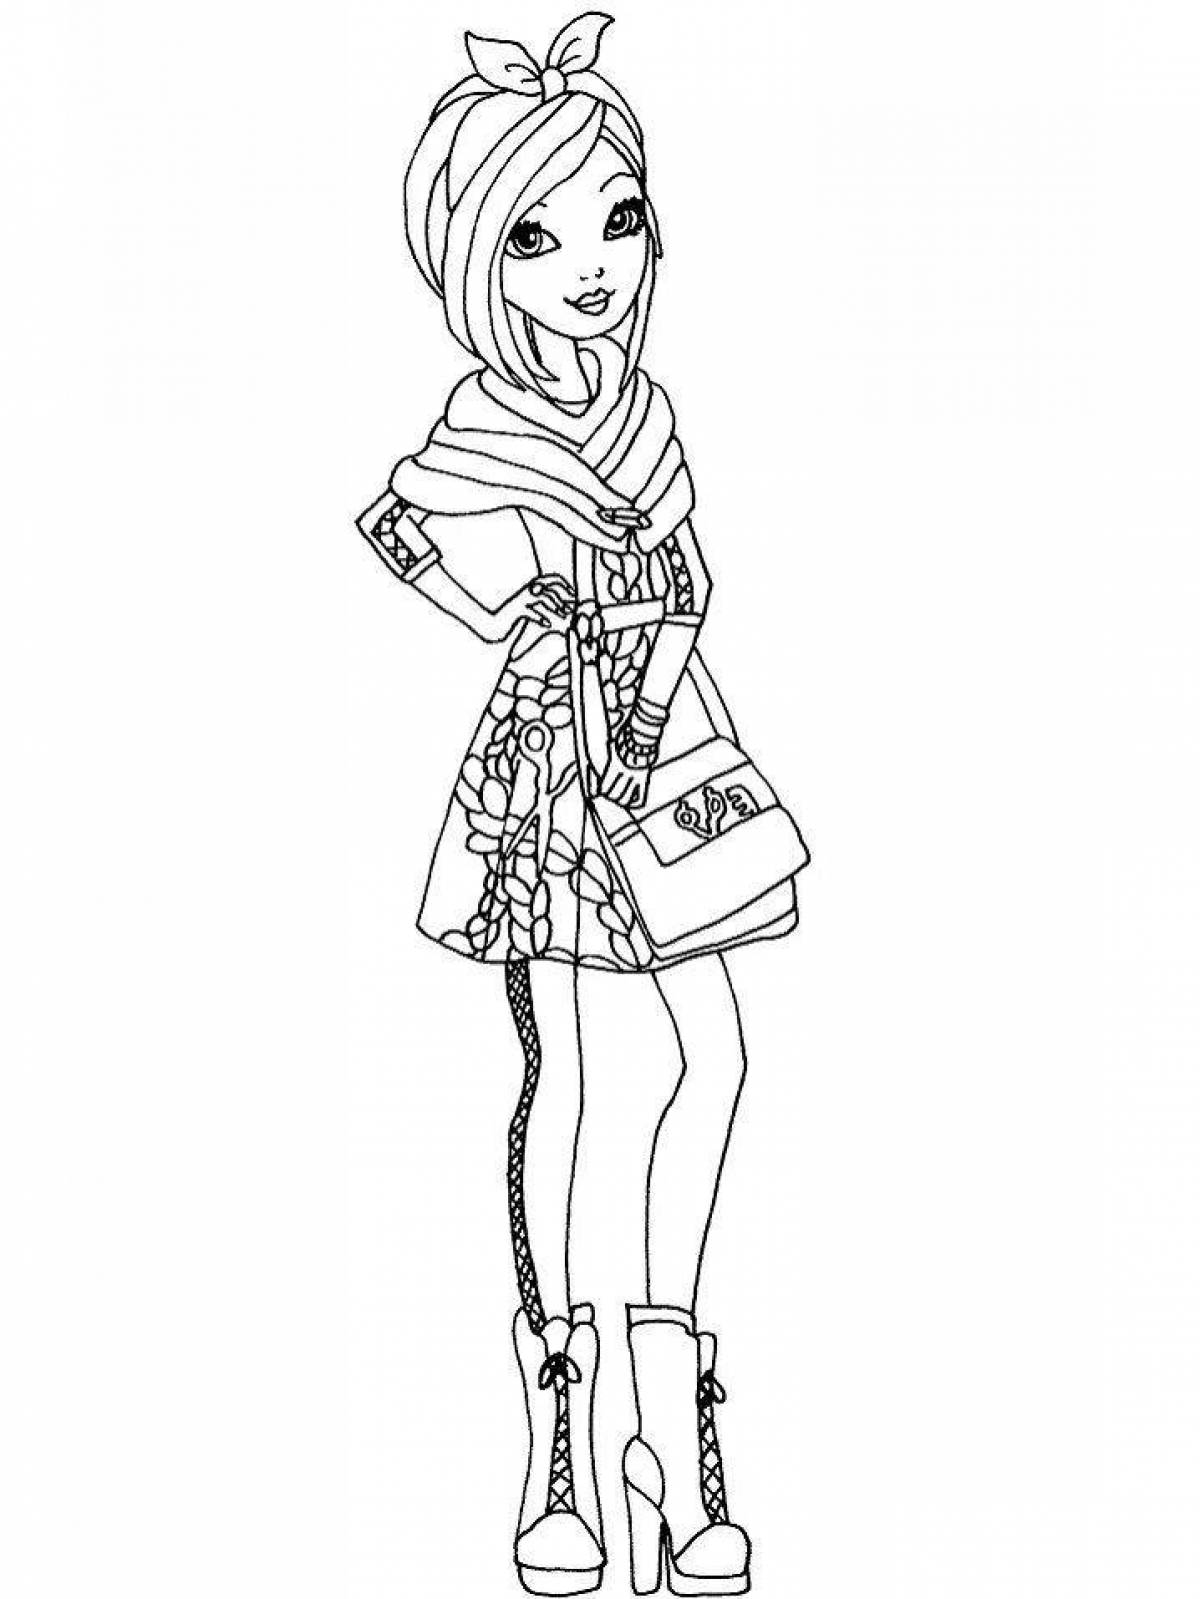 Coloring page funny poppy doll